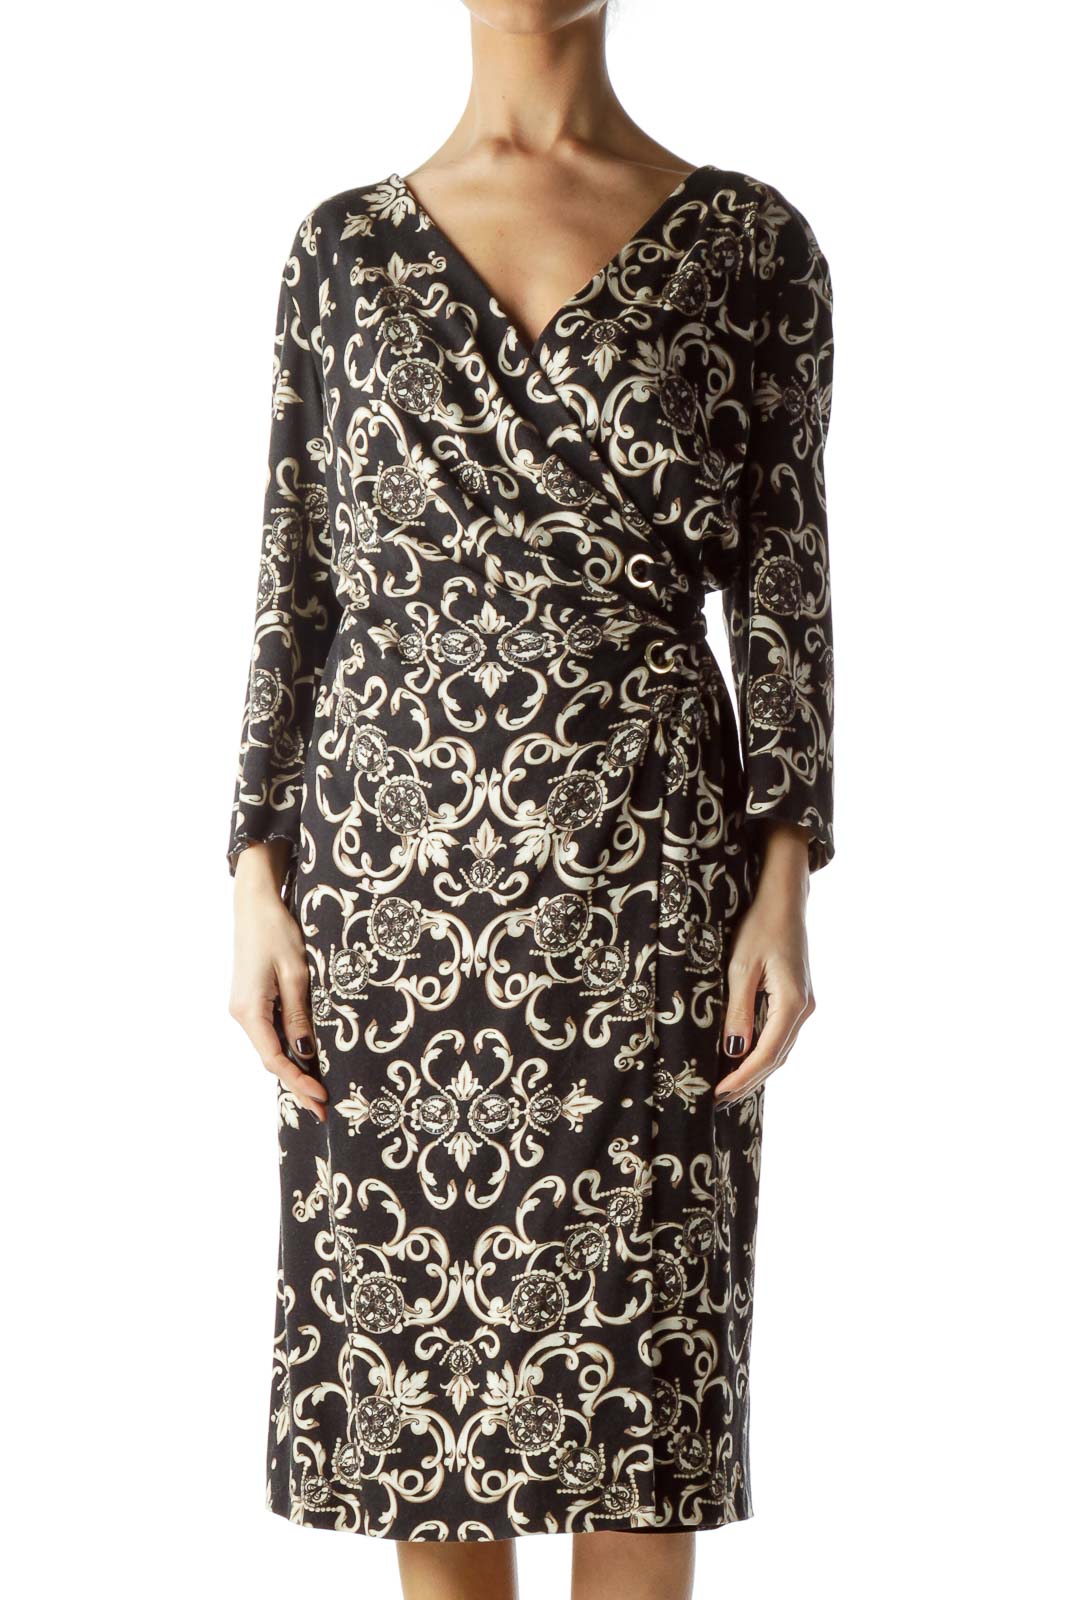 Black Cream and Gold Print Wrap Dress Front